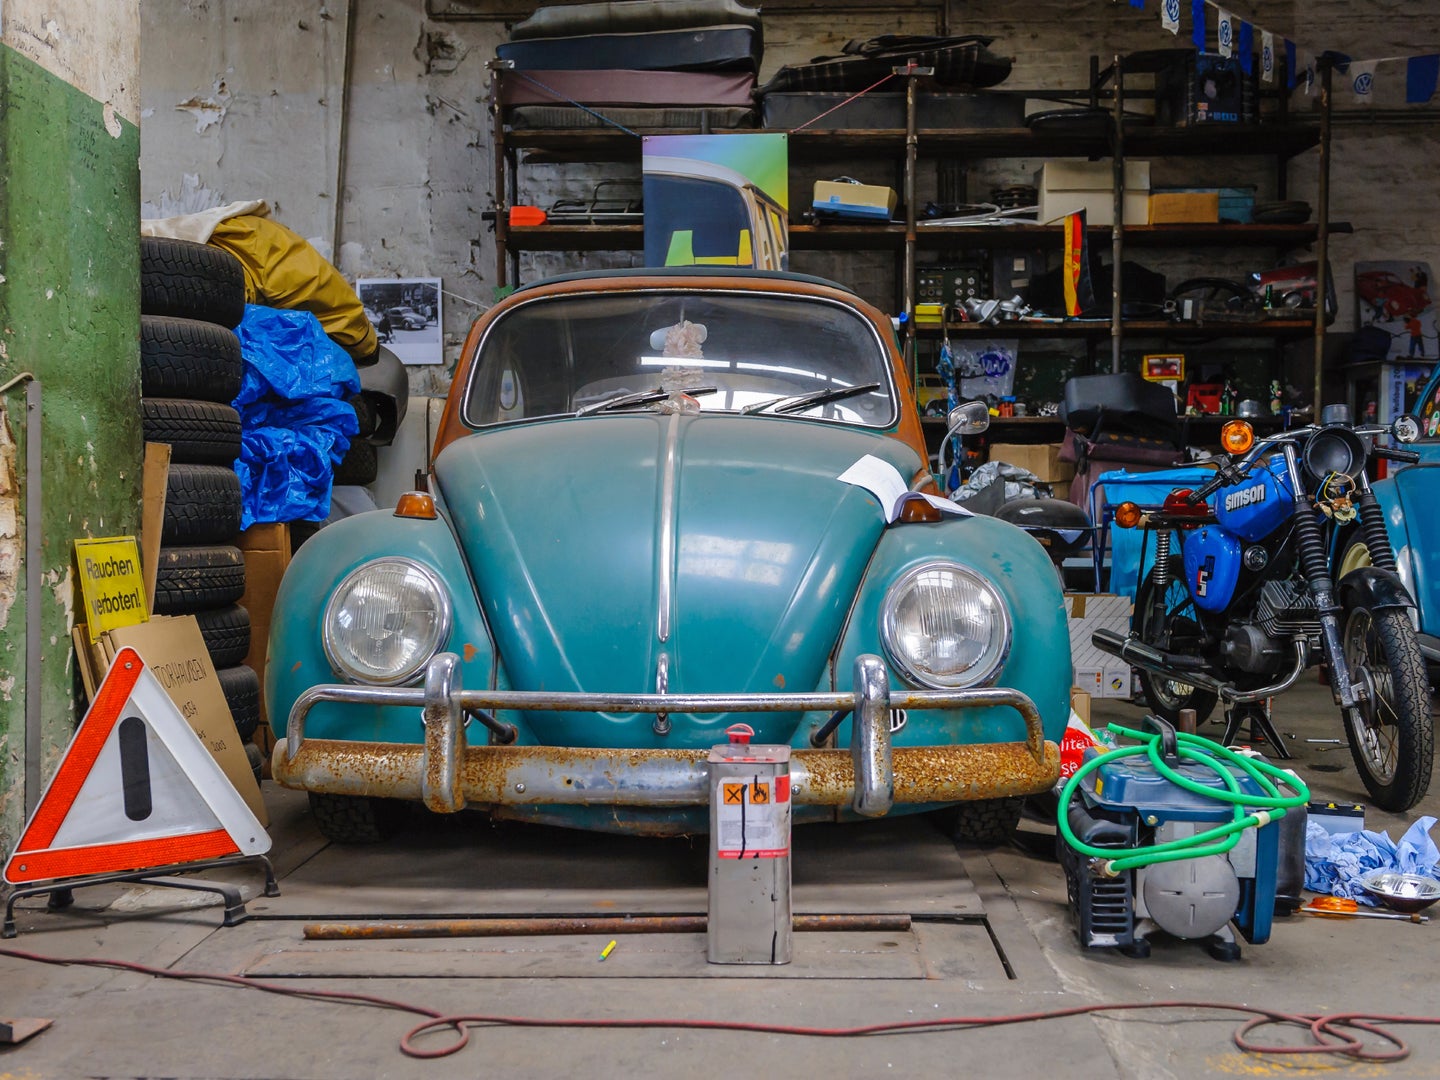 An old Volkswagen Beetle in a garage with a motorcycle and a lot of clutter.